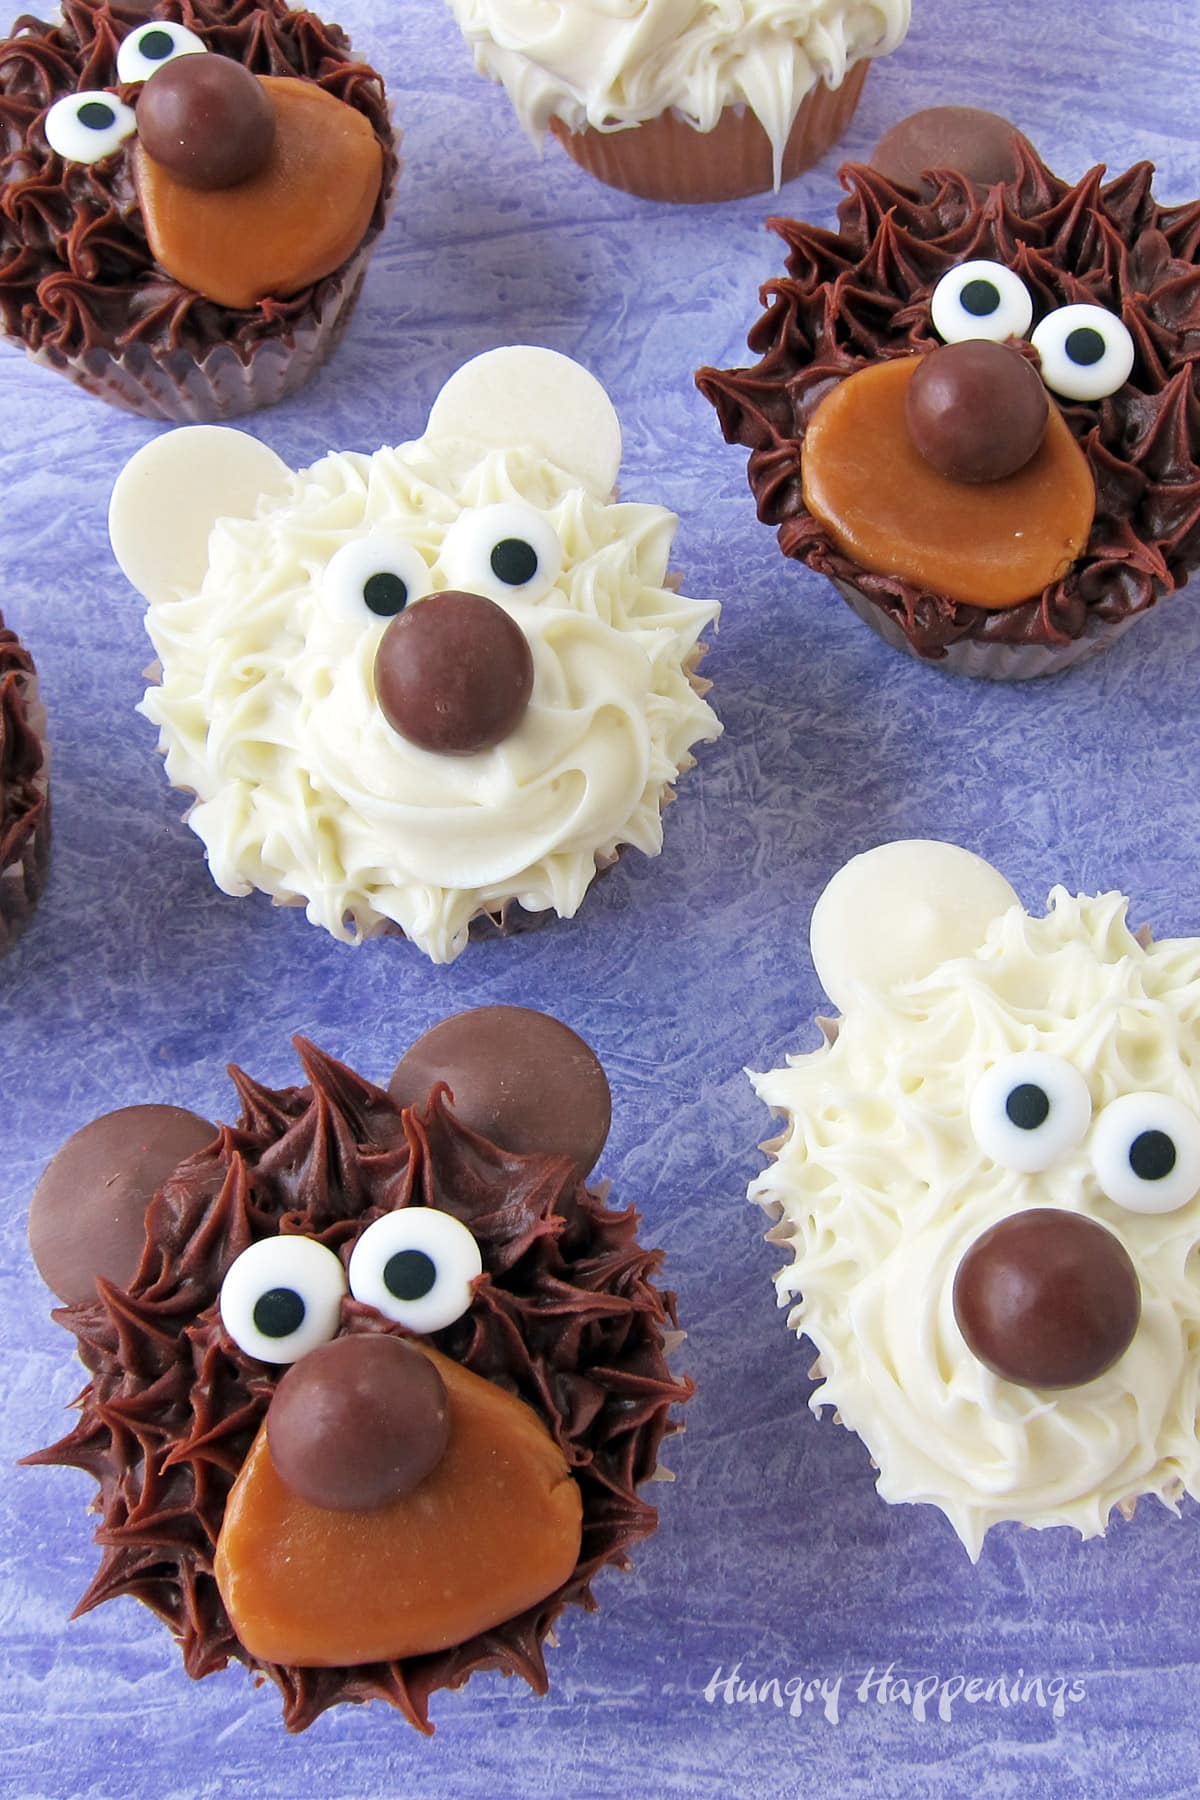 bear cupcakes featuring white polar bear cupcakes and brown grizzly bear cupcakes with candy eyes, chocolate noses, and caramel snouts.